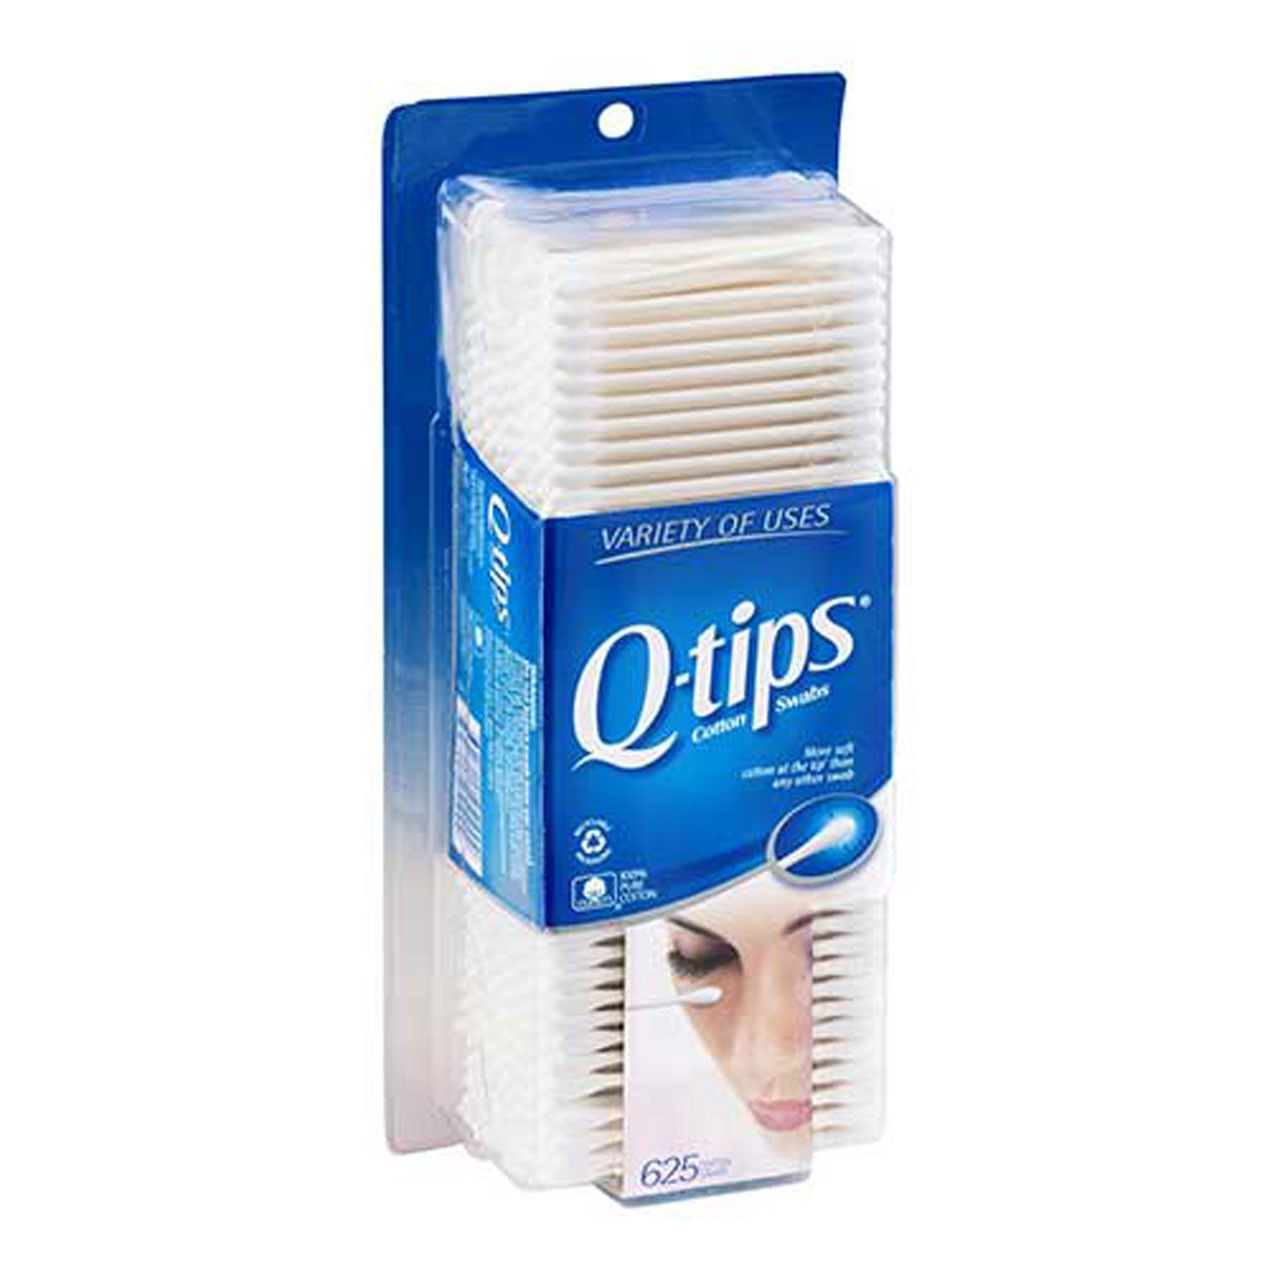 What is the main purpose of Q-tips?